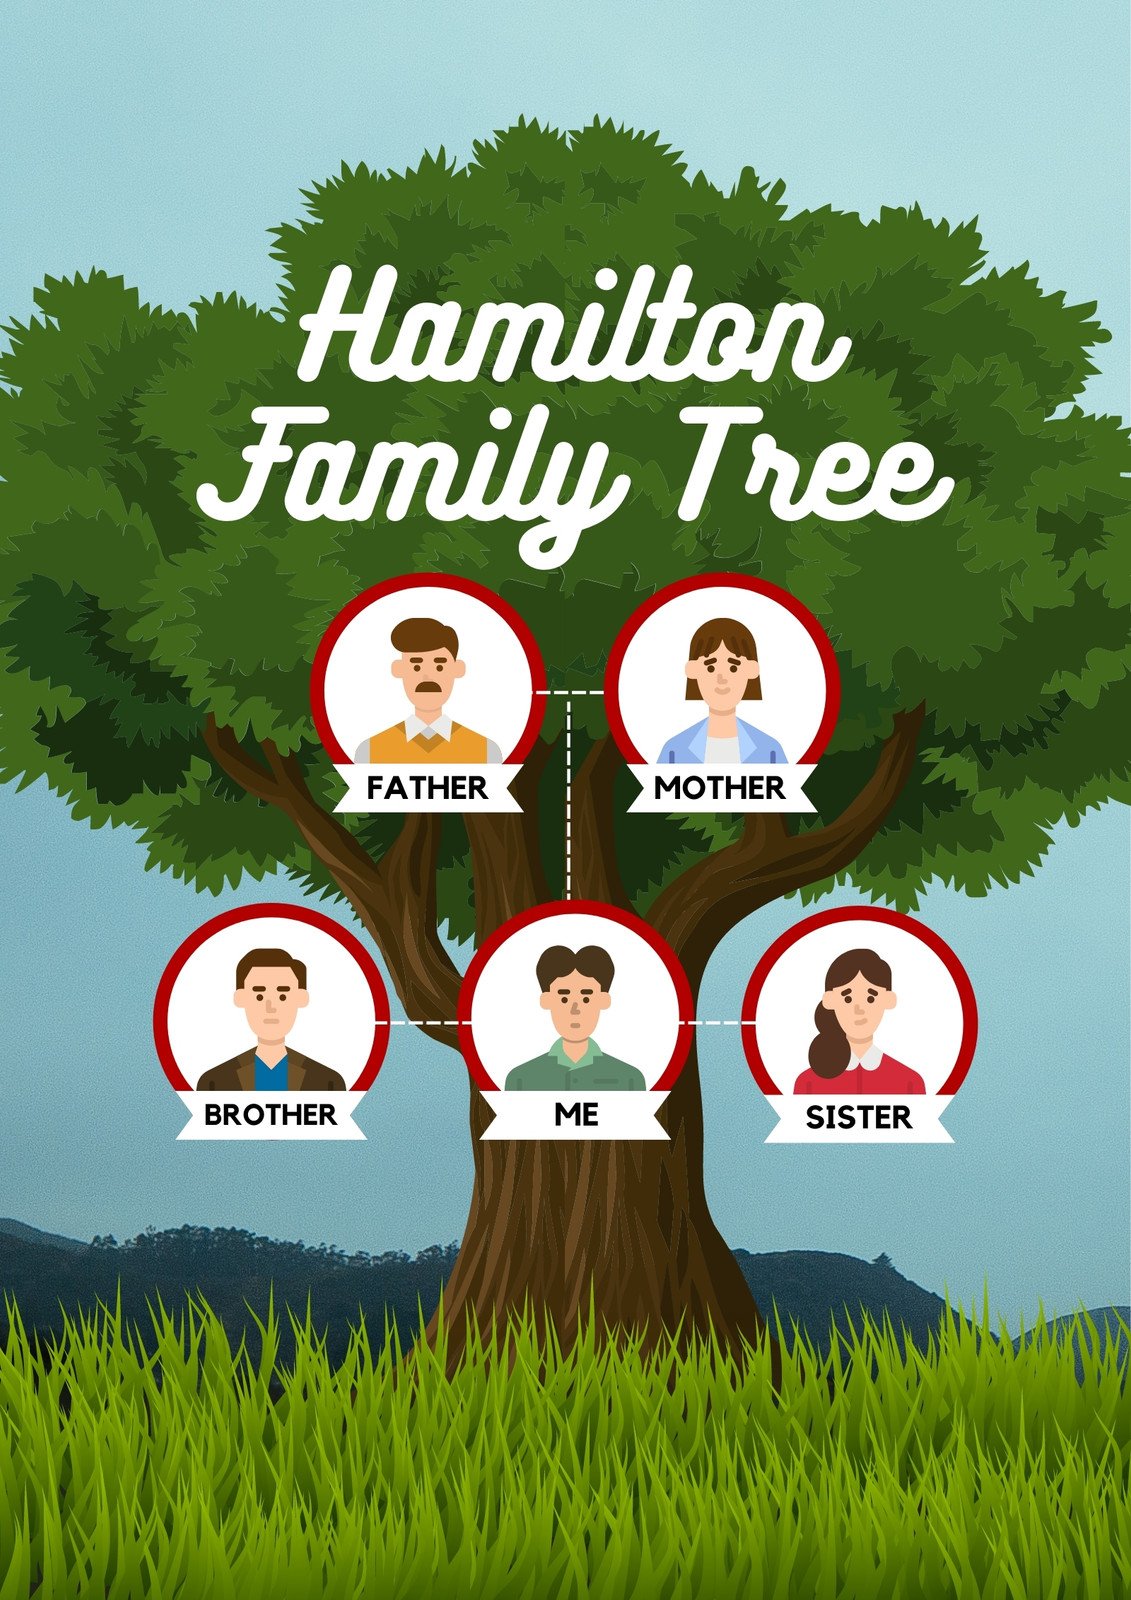 Family Tree for Kids - Getting Them Interested Can Be Challenging